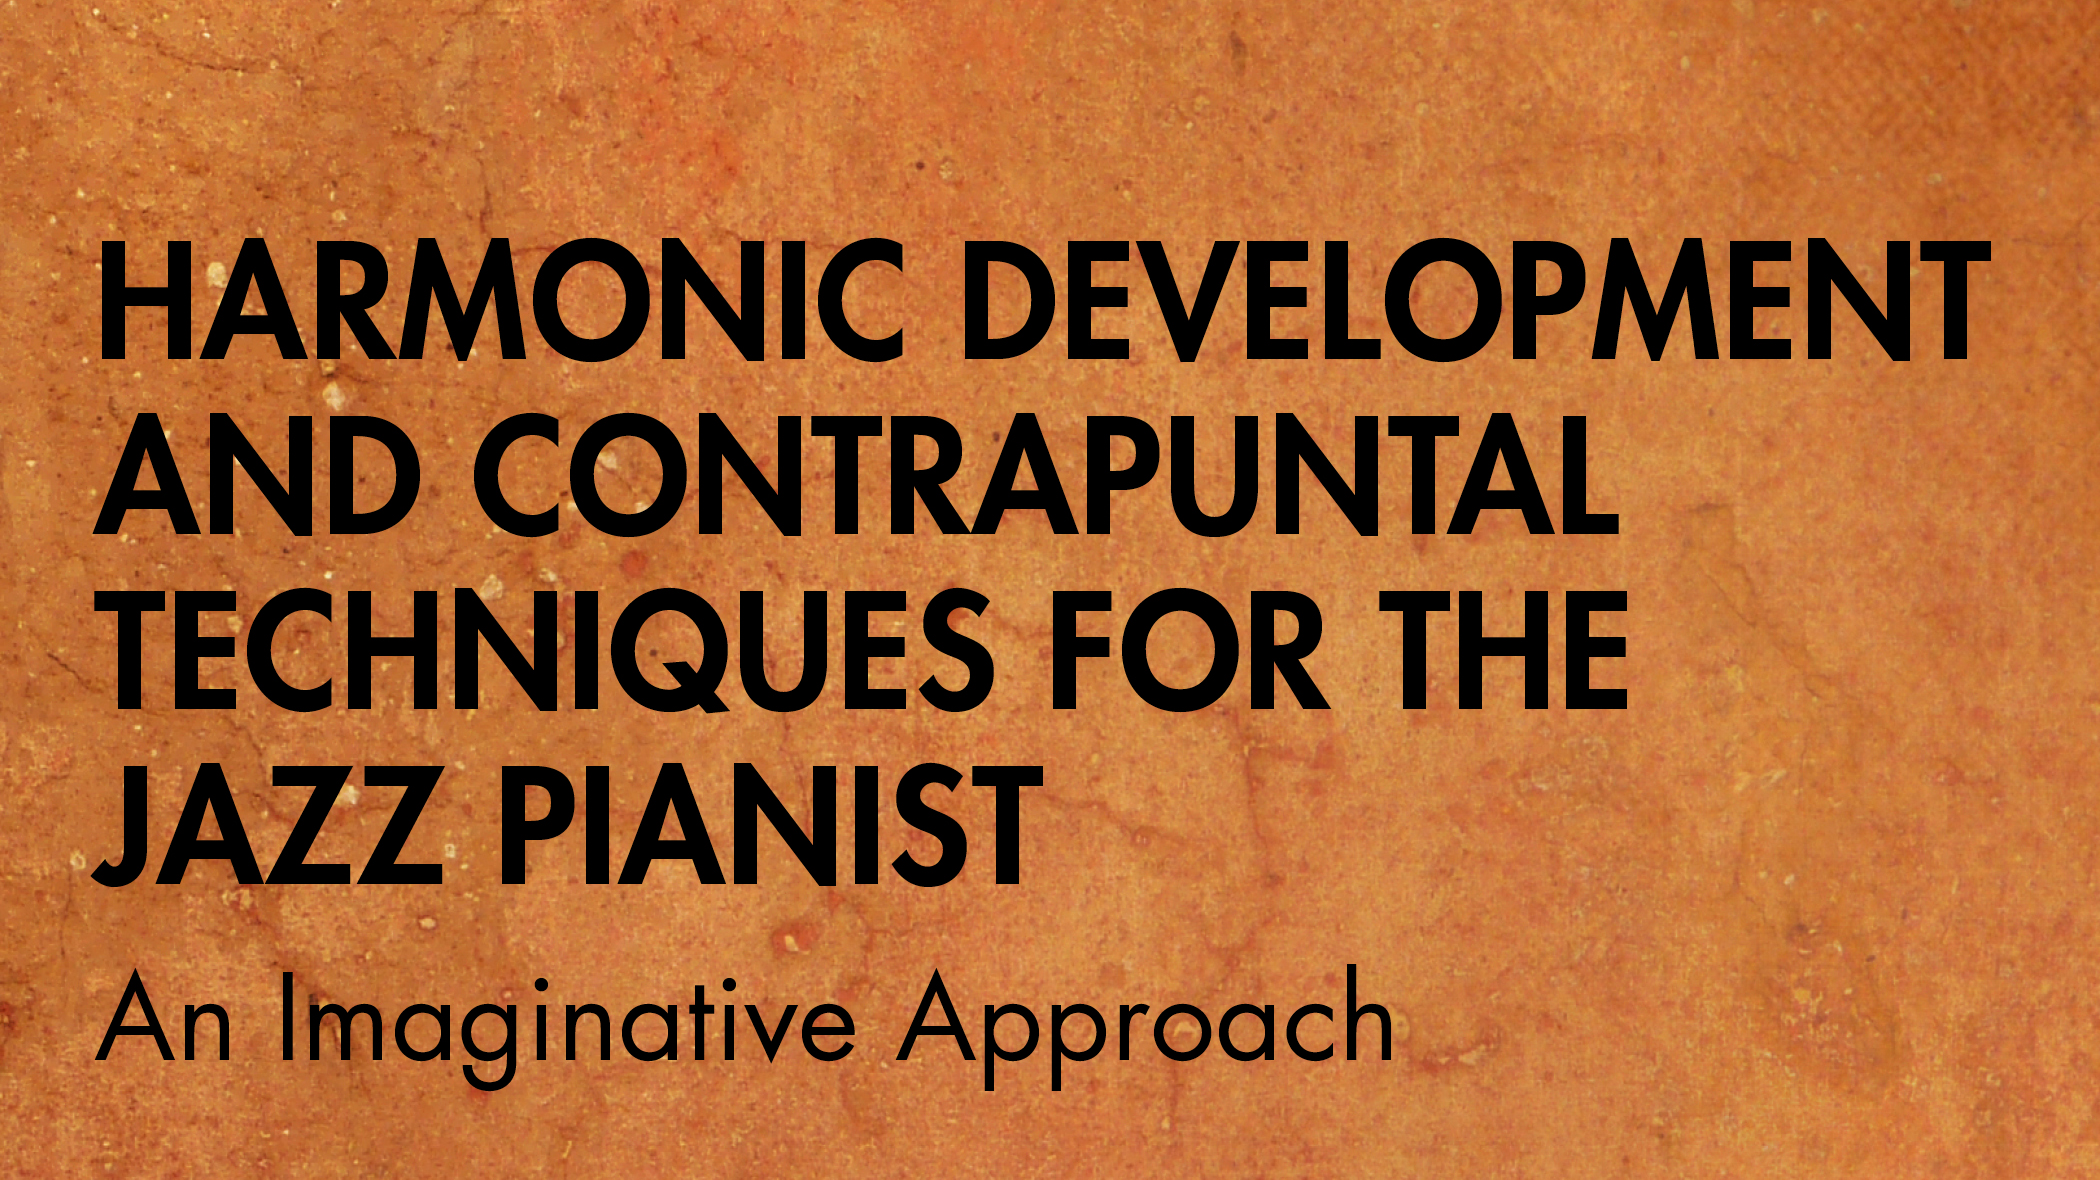 Title of Gary Motley's book: Harmonic Development and Contrapuntal Techniques for the Jazz Pianist